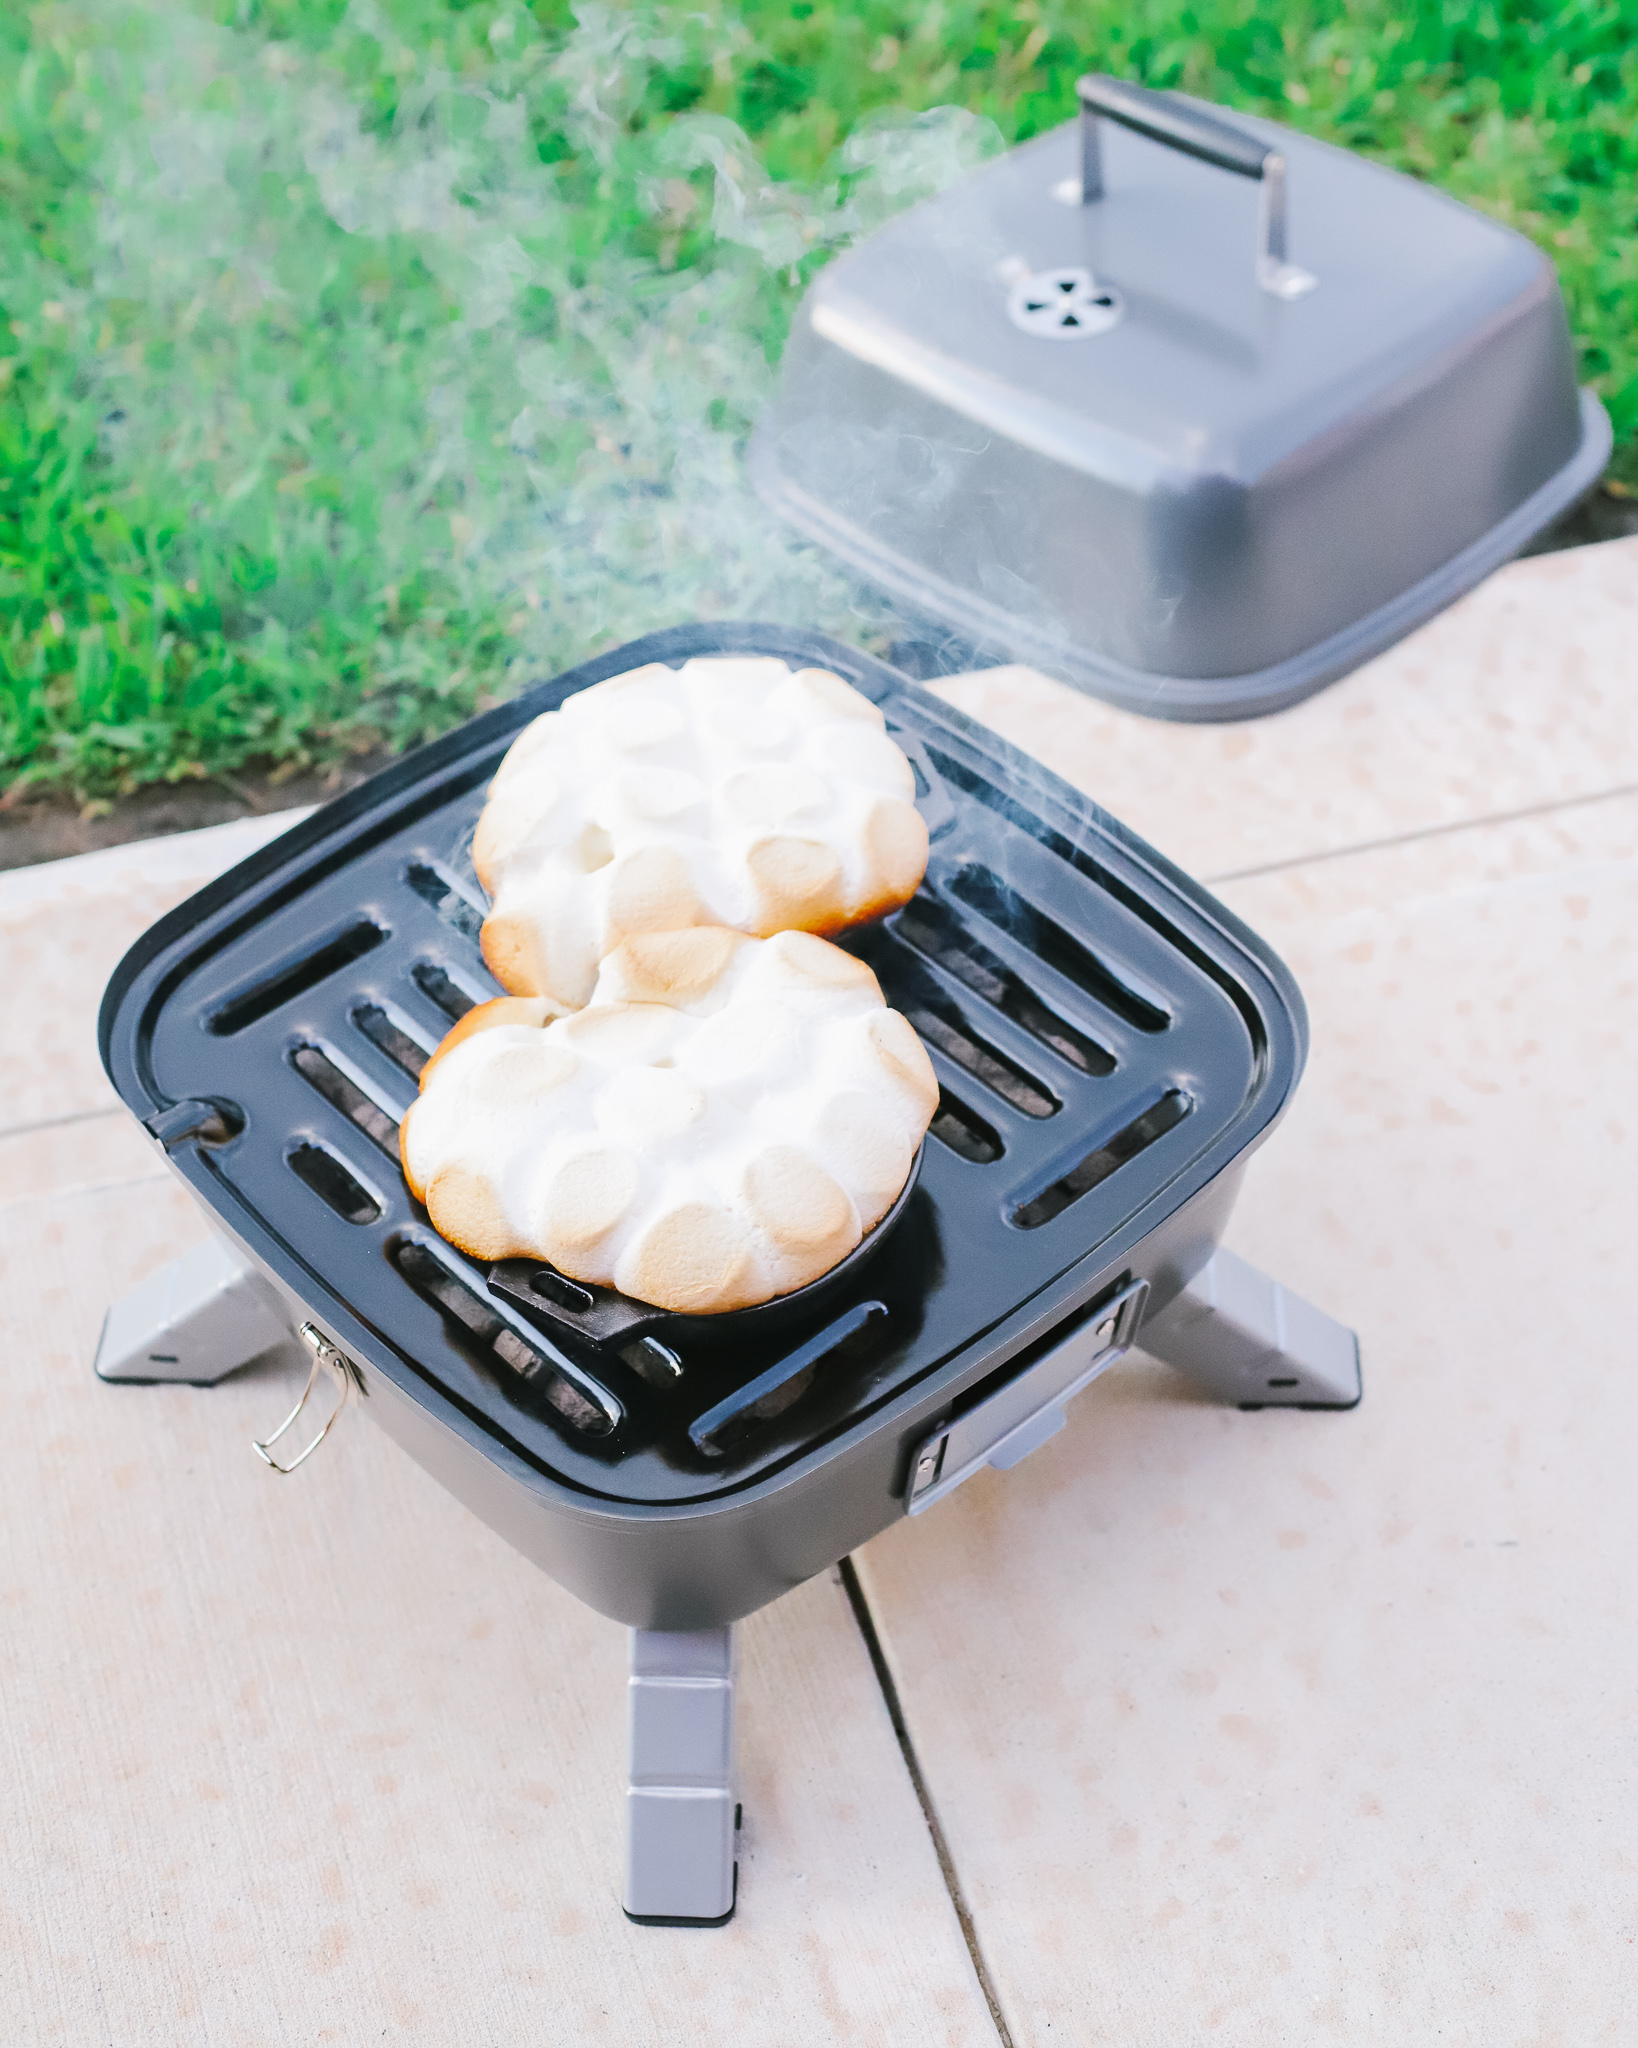 Pampered Chef Outdoor Portable Grill for s'mores and more! #ad